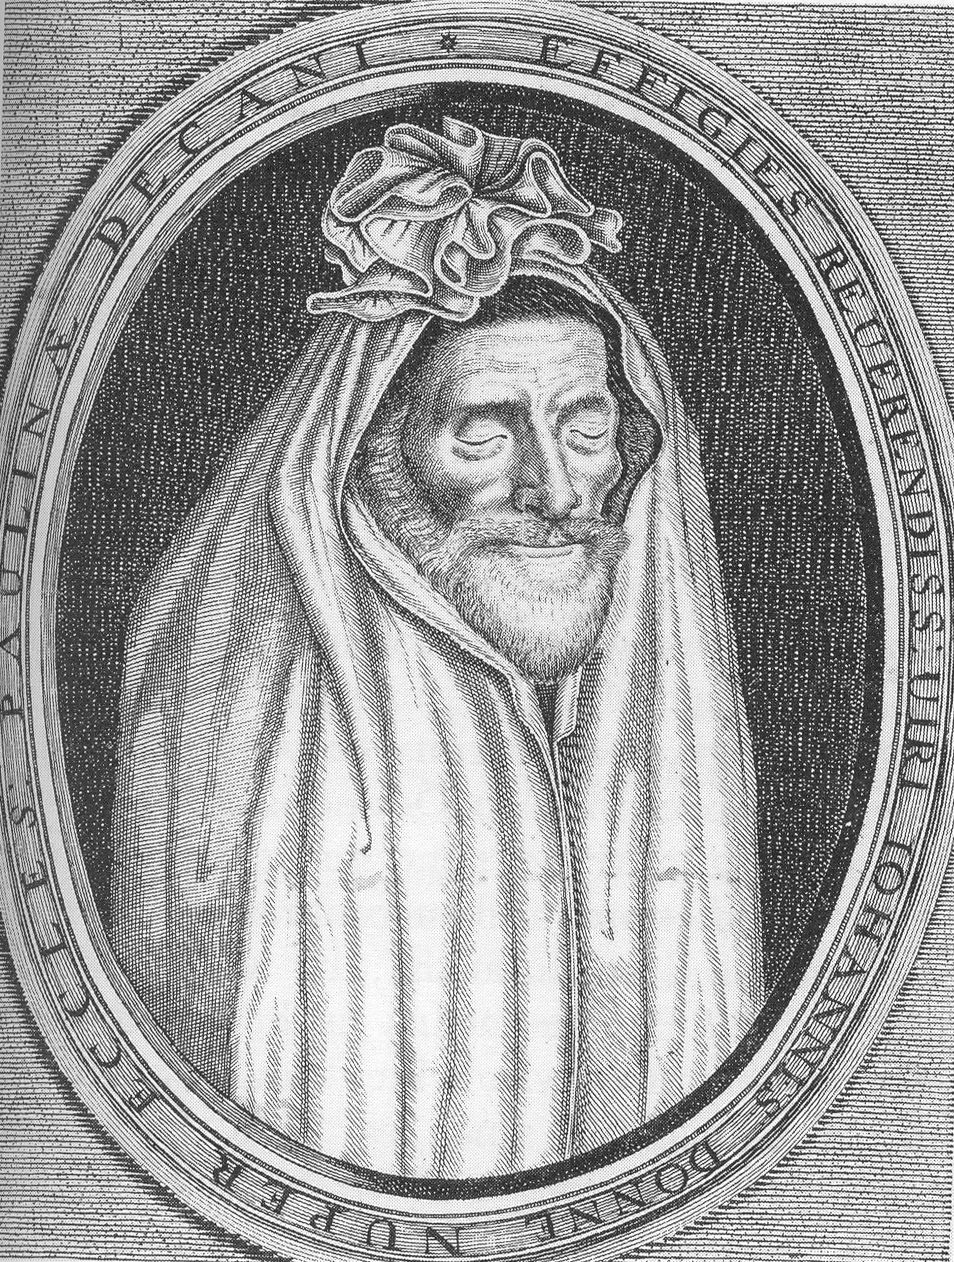 John Donne in his shroud, engraved by Martin Droeshout.